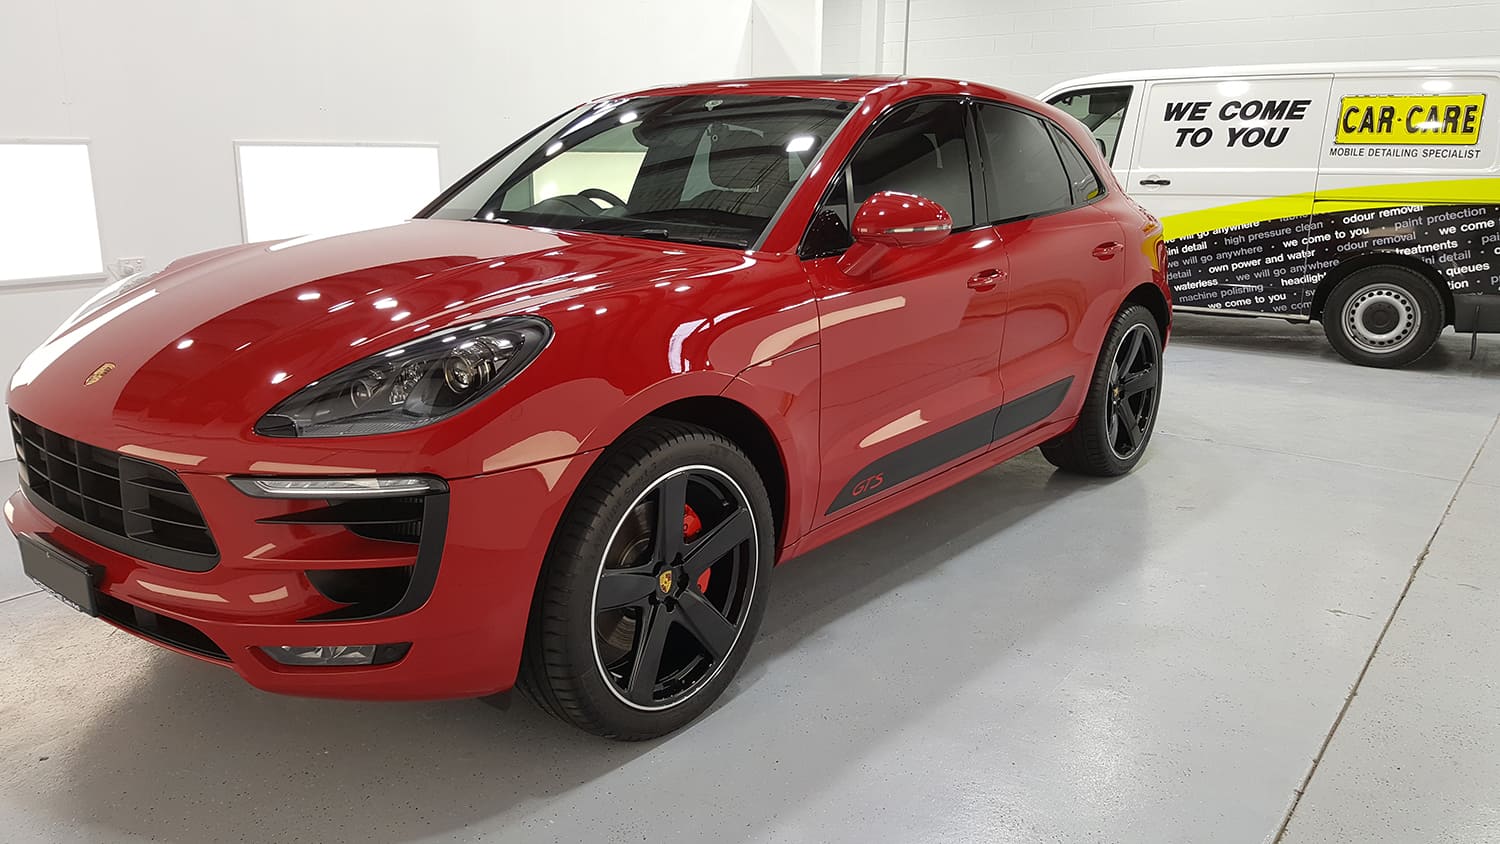 A freshly cleaned Red Porsche Macan S, that has had a full car detailing service on it, in a showroom